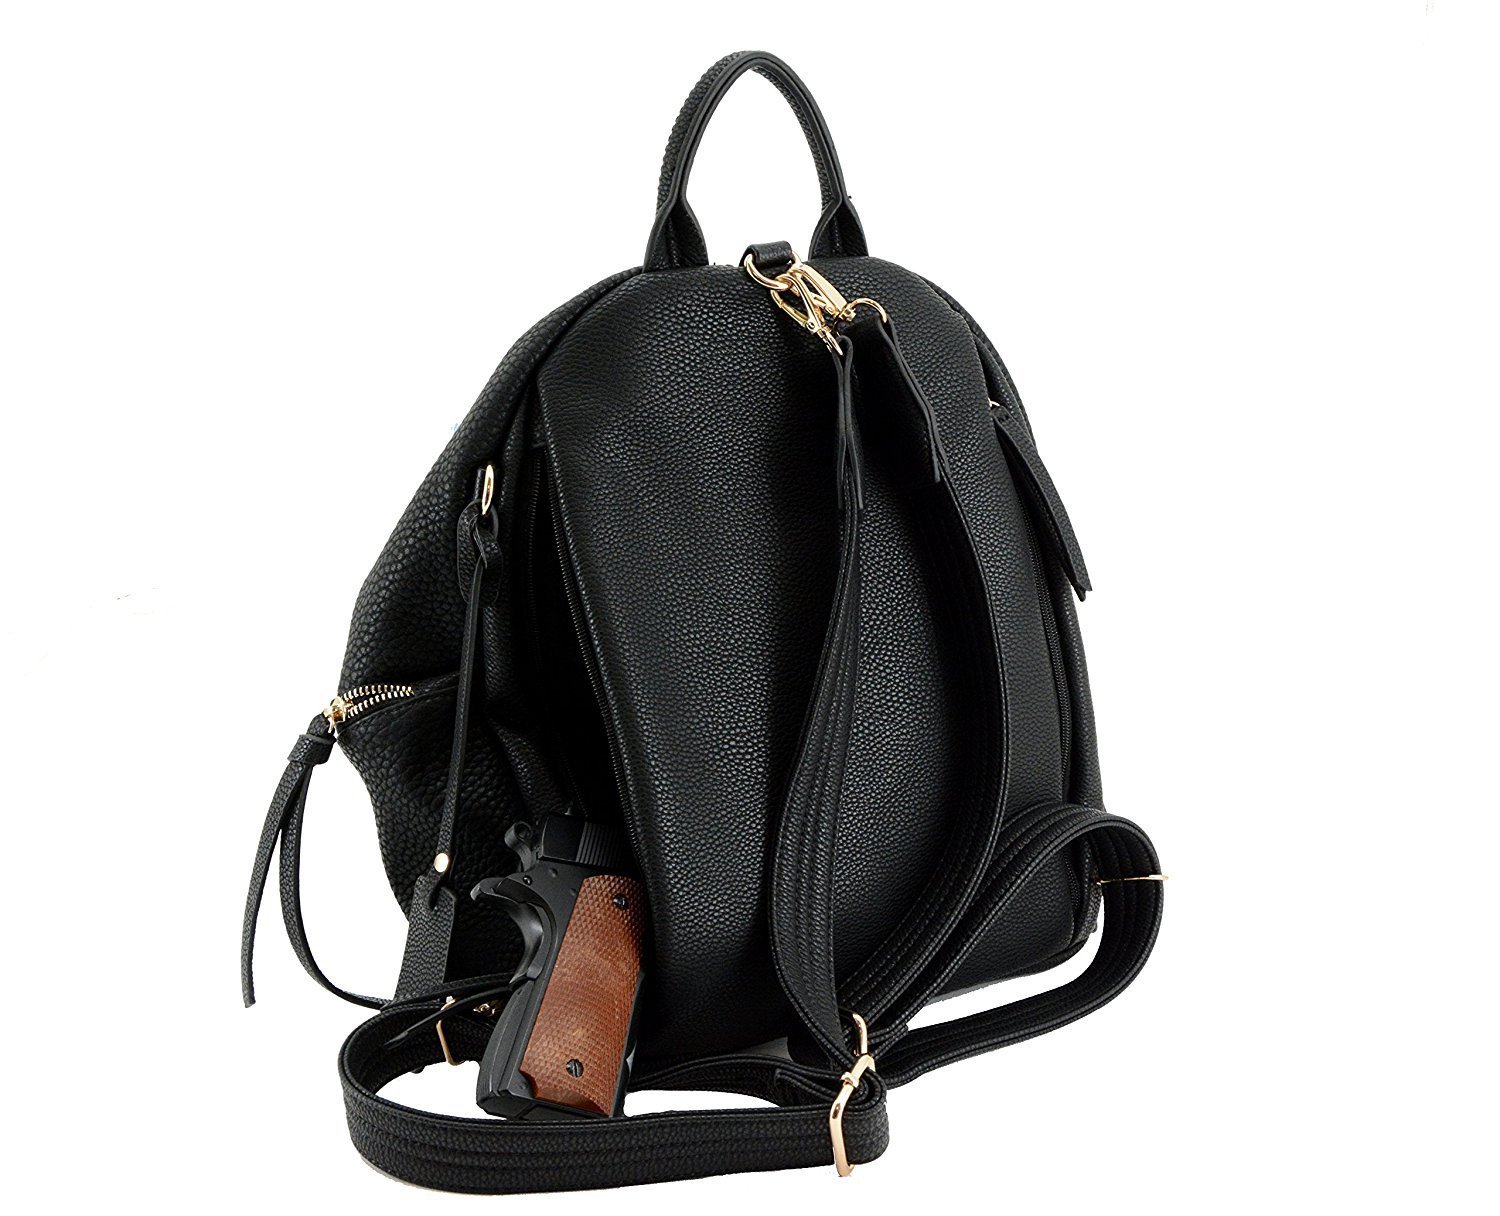 Aurora Concealed Carry Purse Backpack - Handbags & Purses